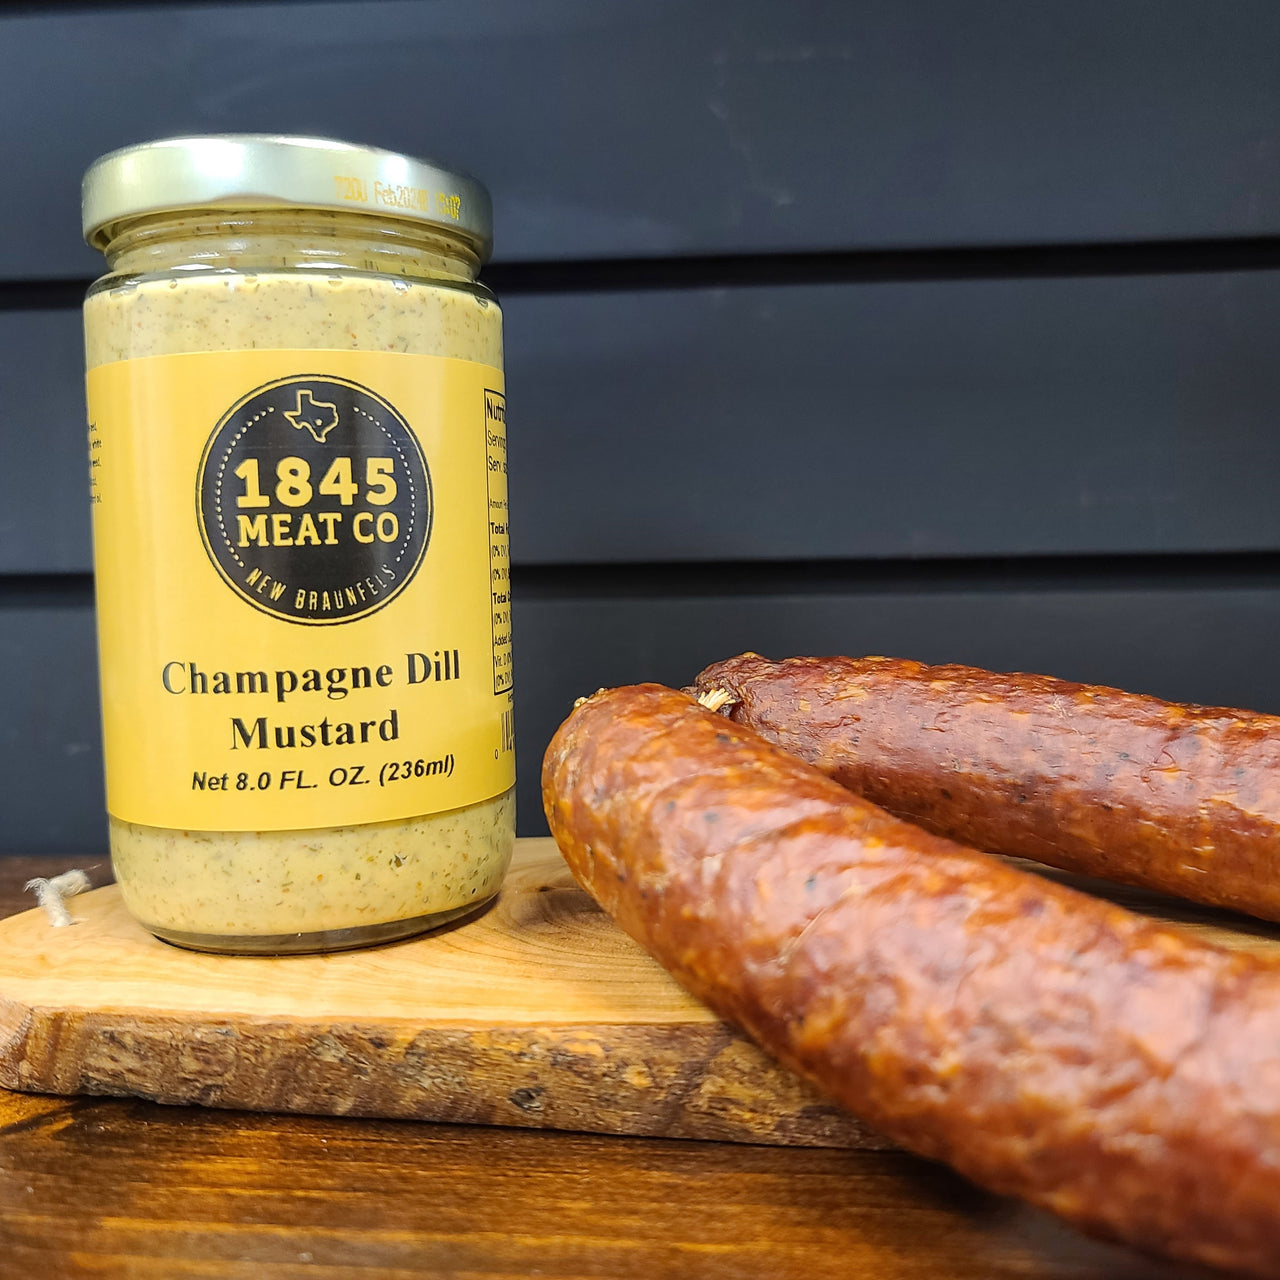 ﻿This mustard is a great addition to a meat board, sandwich or snack!  Just a hint of dill and sweetness from the champagne.